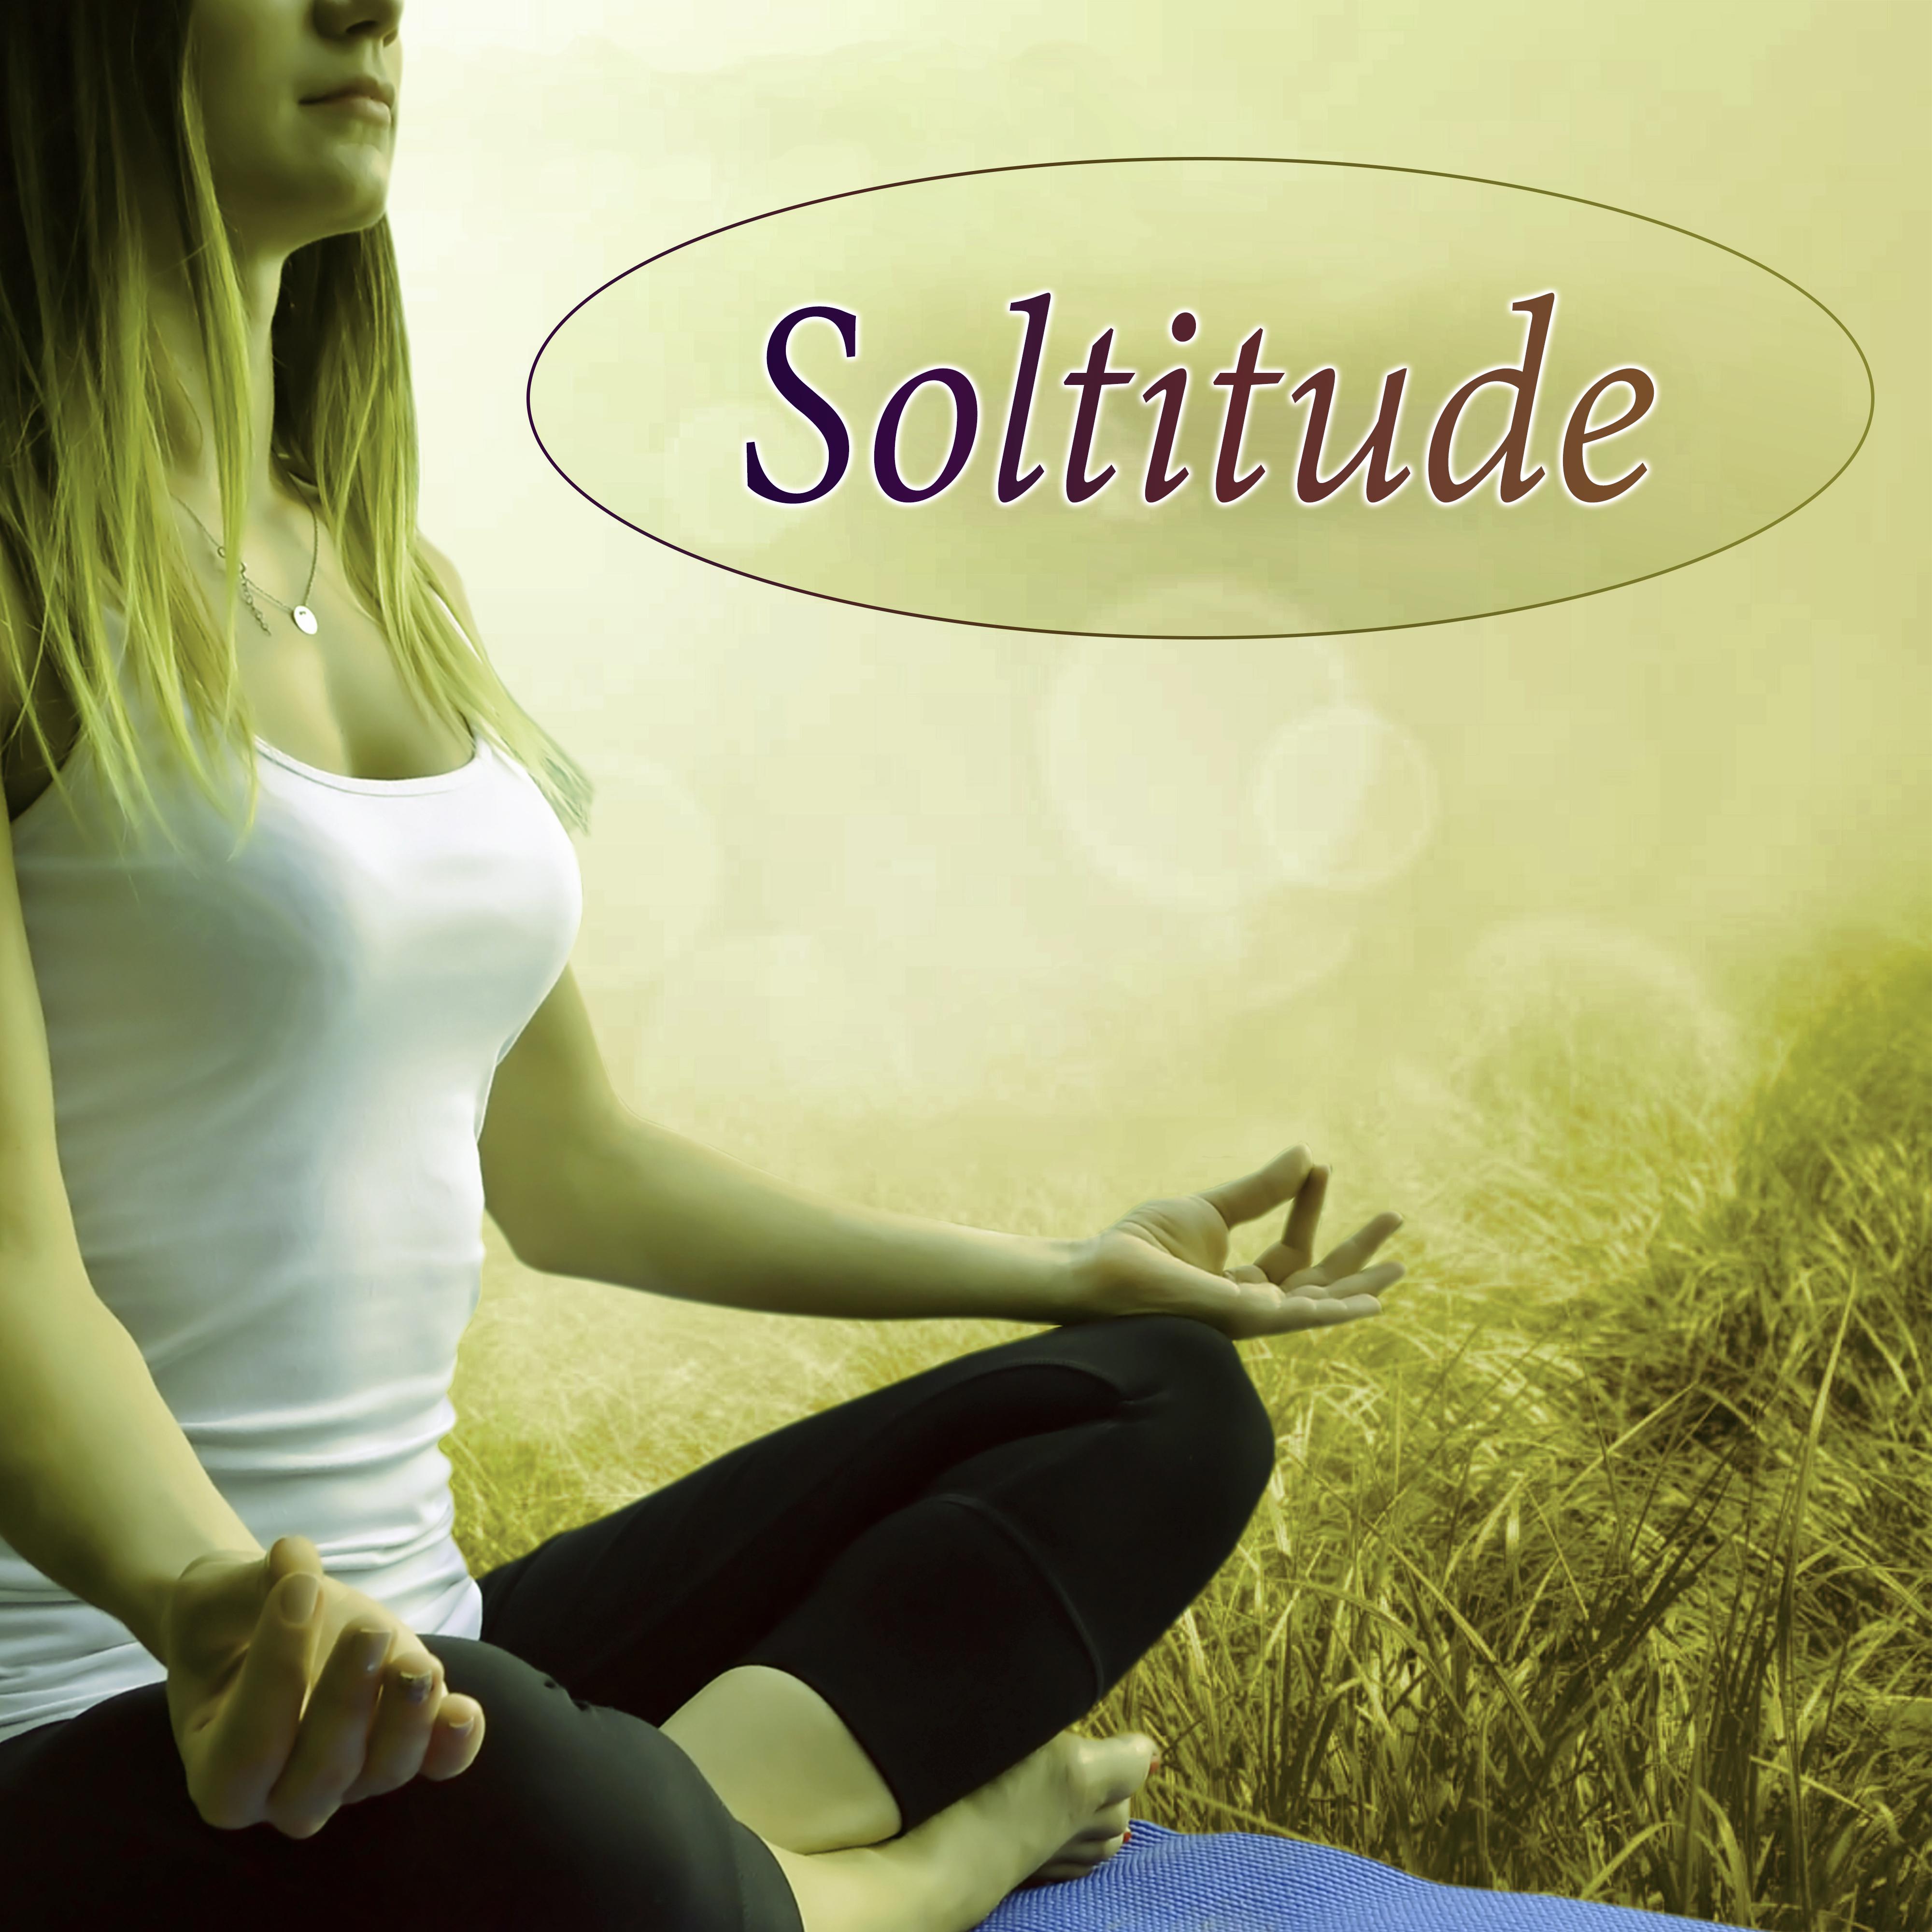 Soltitude - Reiki Therapy, Massage Music, Inner Peace, Relaxation Meditation, Yoga, Spa Wellness, Regeneration, Body Therapy